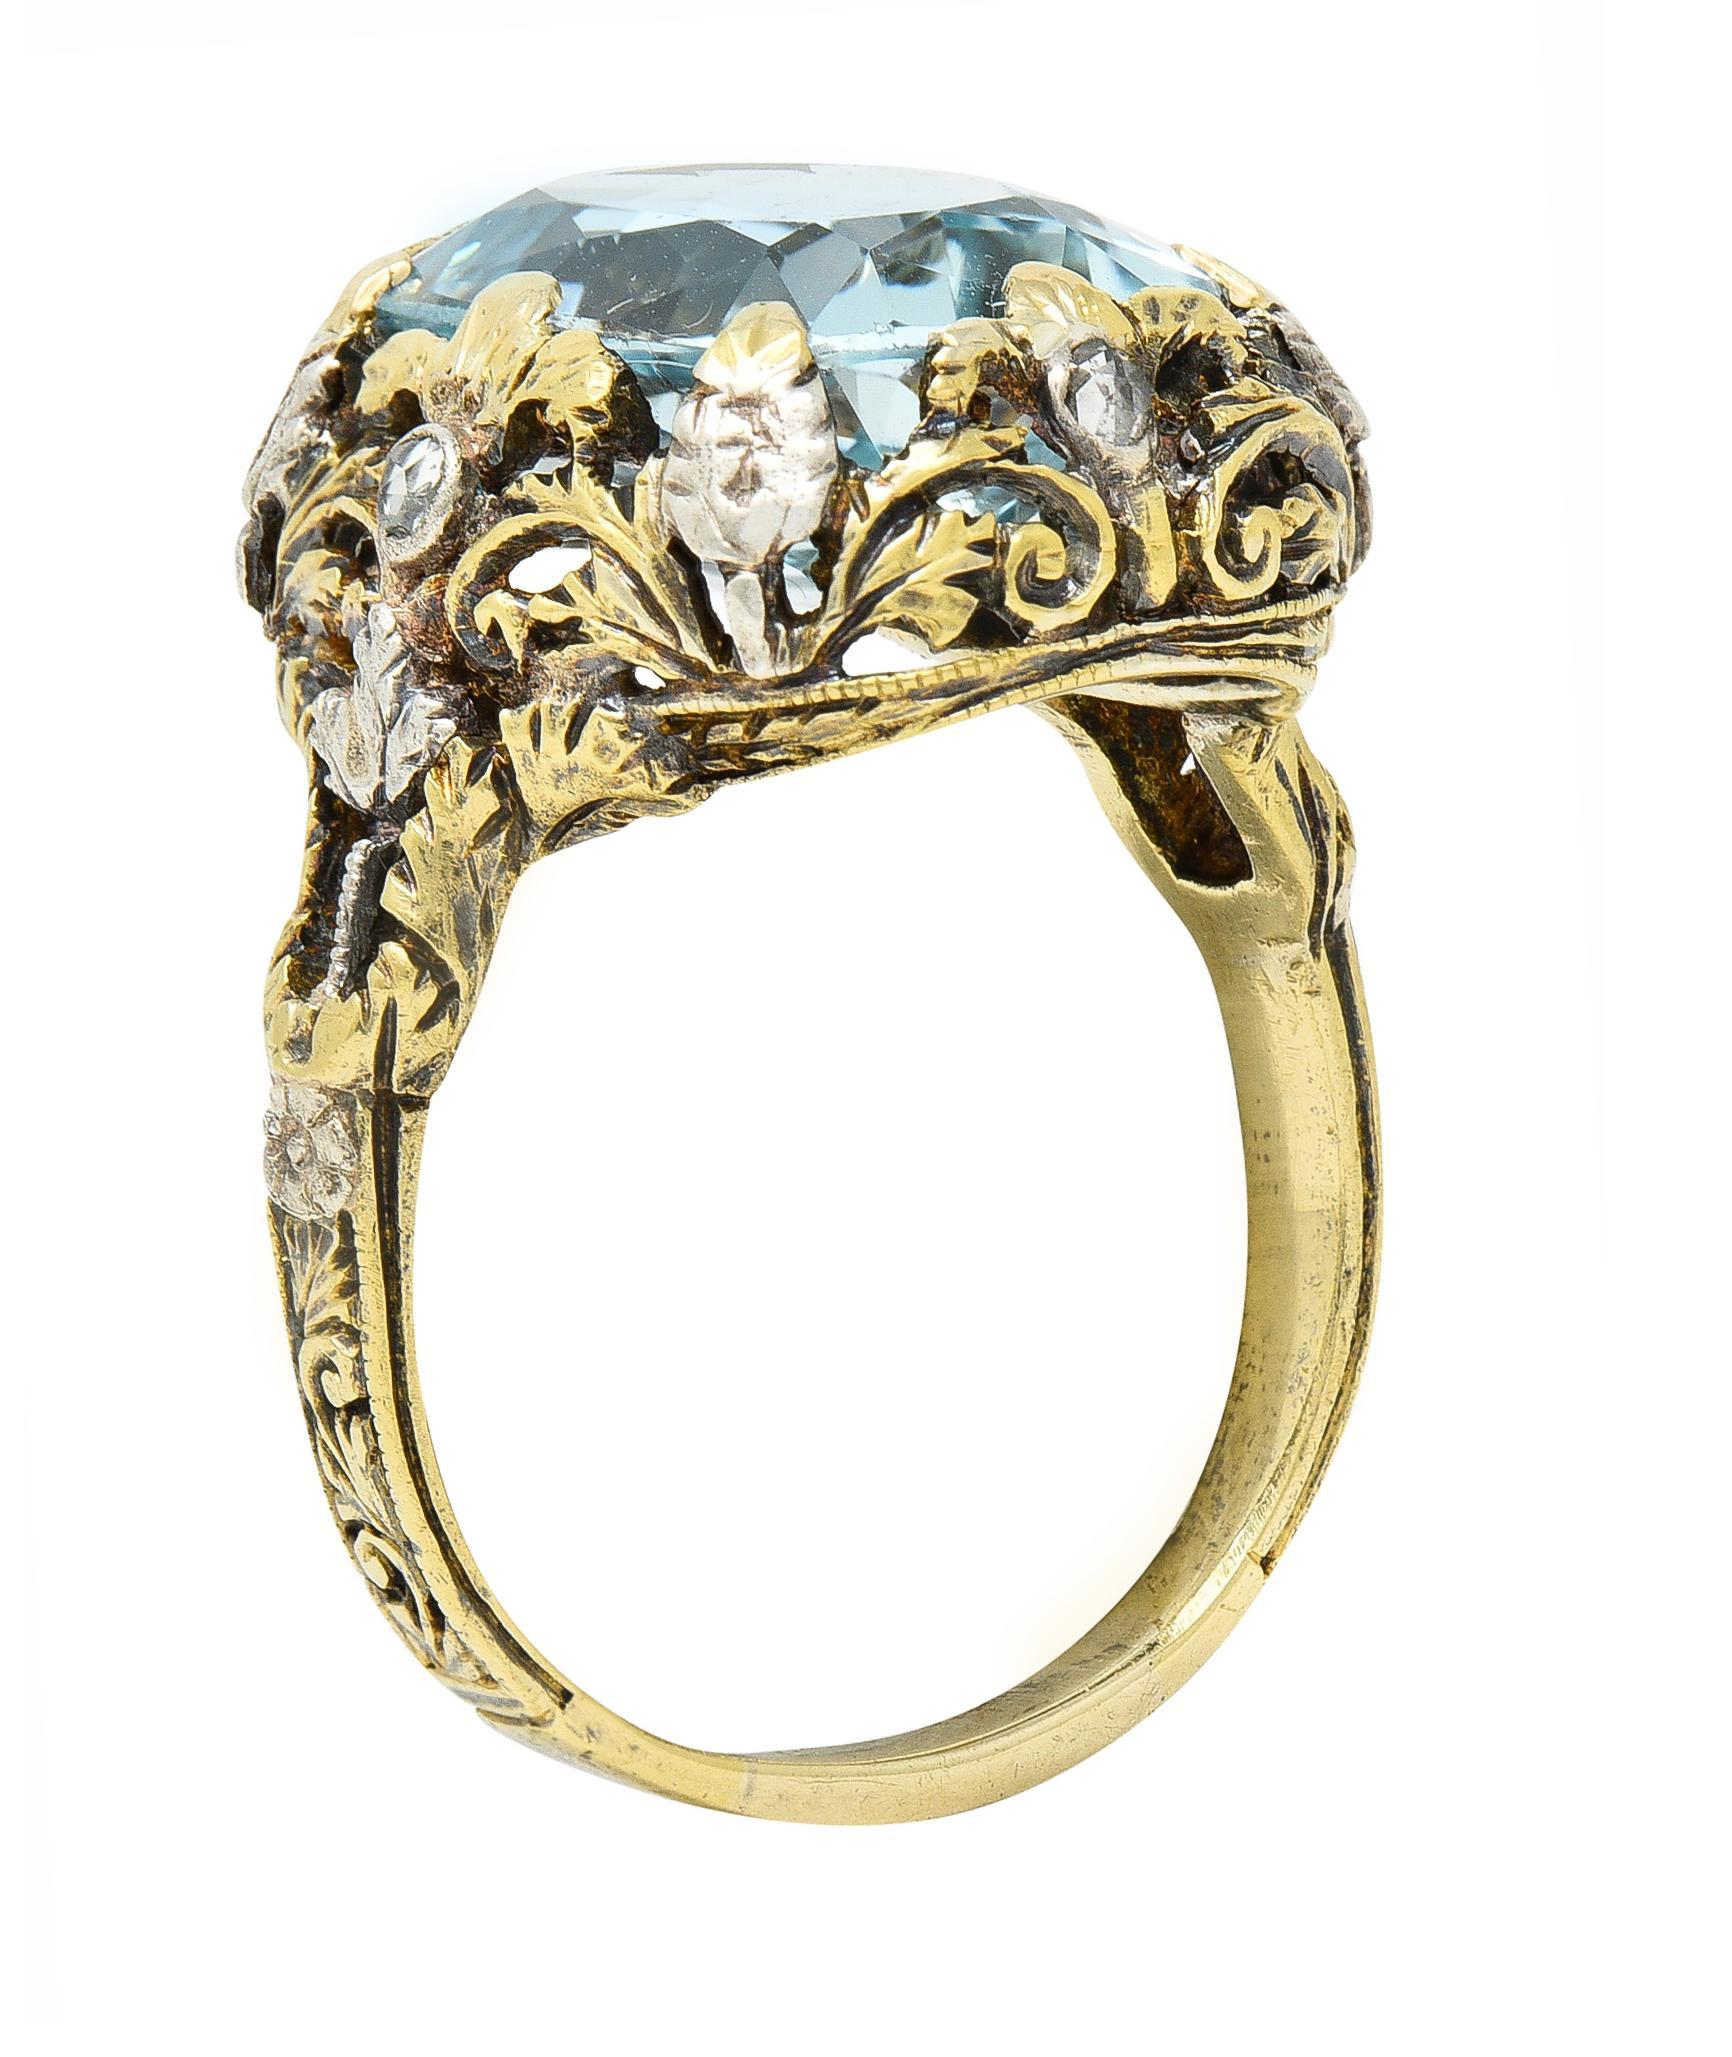 Centering a mixed cushion cut aquamarine weighing approximately 6.40 carats
Transparent light blue in color - prong set in scrolling foliate motif gallery 
Pierced with silver-topped orange blossom flowers at shoulders
With rose cut diamonds bezel